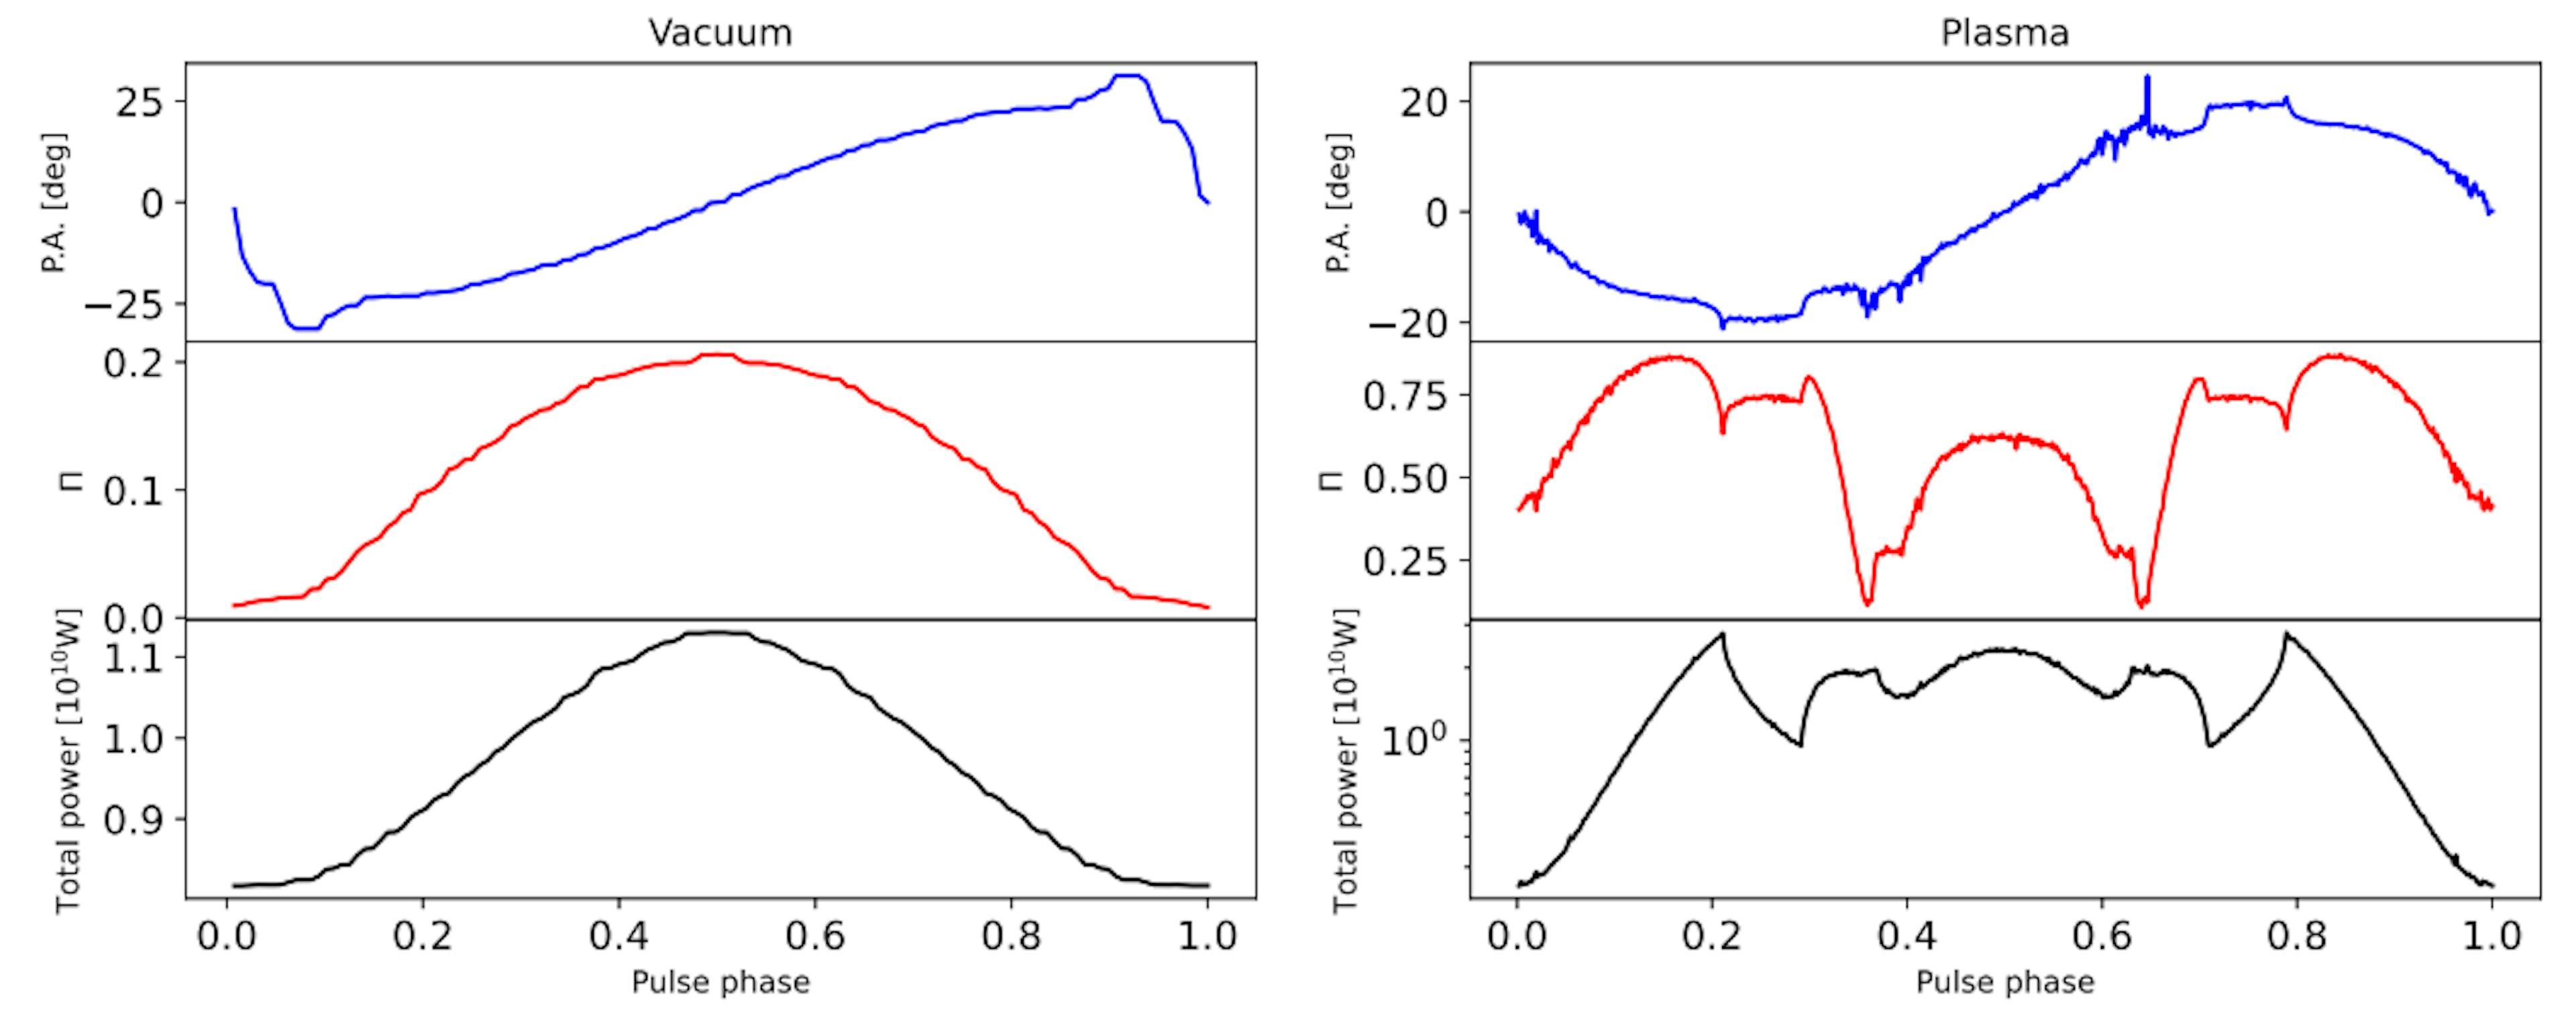 FIG. 2. Axion-induced radio emission as a function of pulse phases: vacuum versus plasma. A comparison of axion-inducedemission pulse profiles and polarizations without and with plasma is shown in the left and right columns, respectively. Each